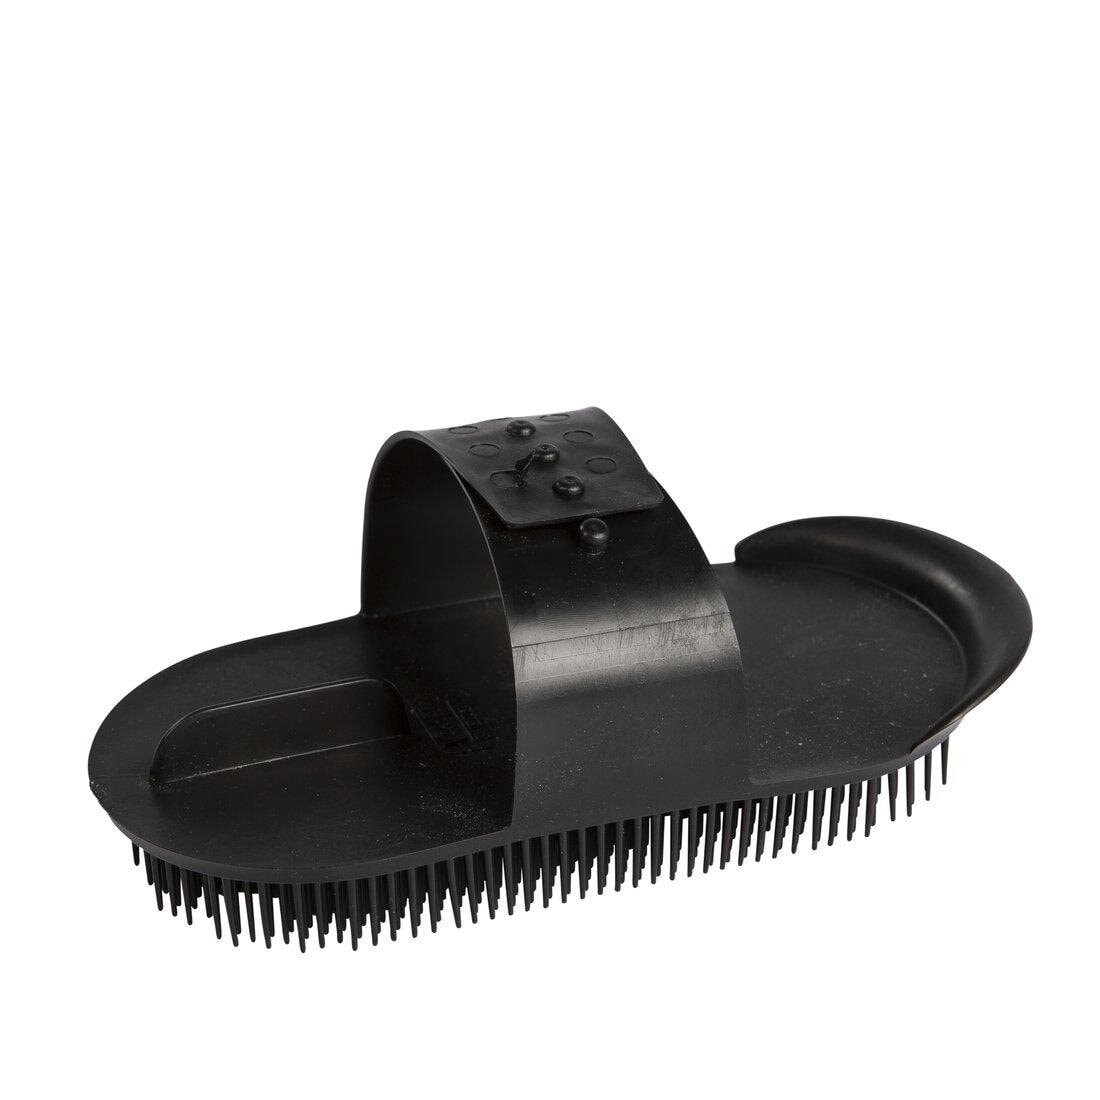 Rubber curry comb - Black